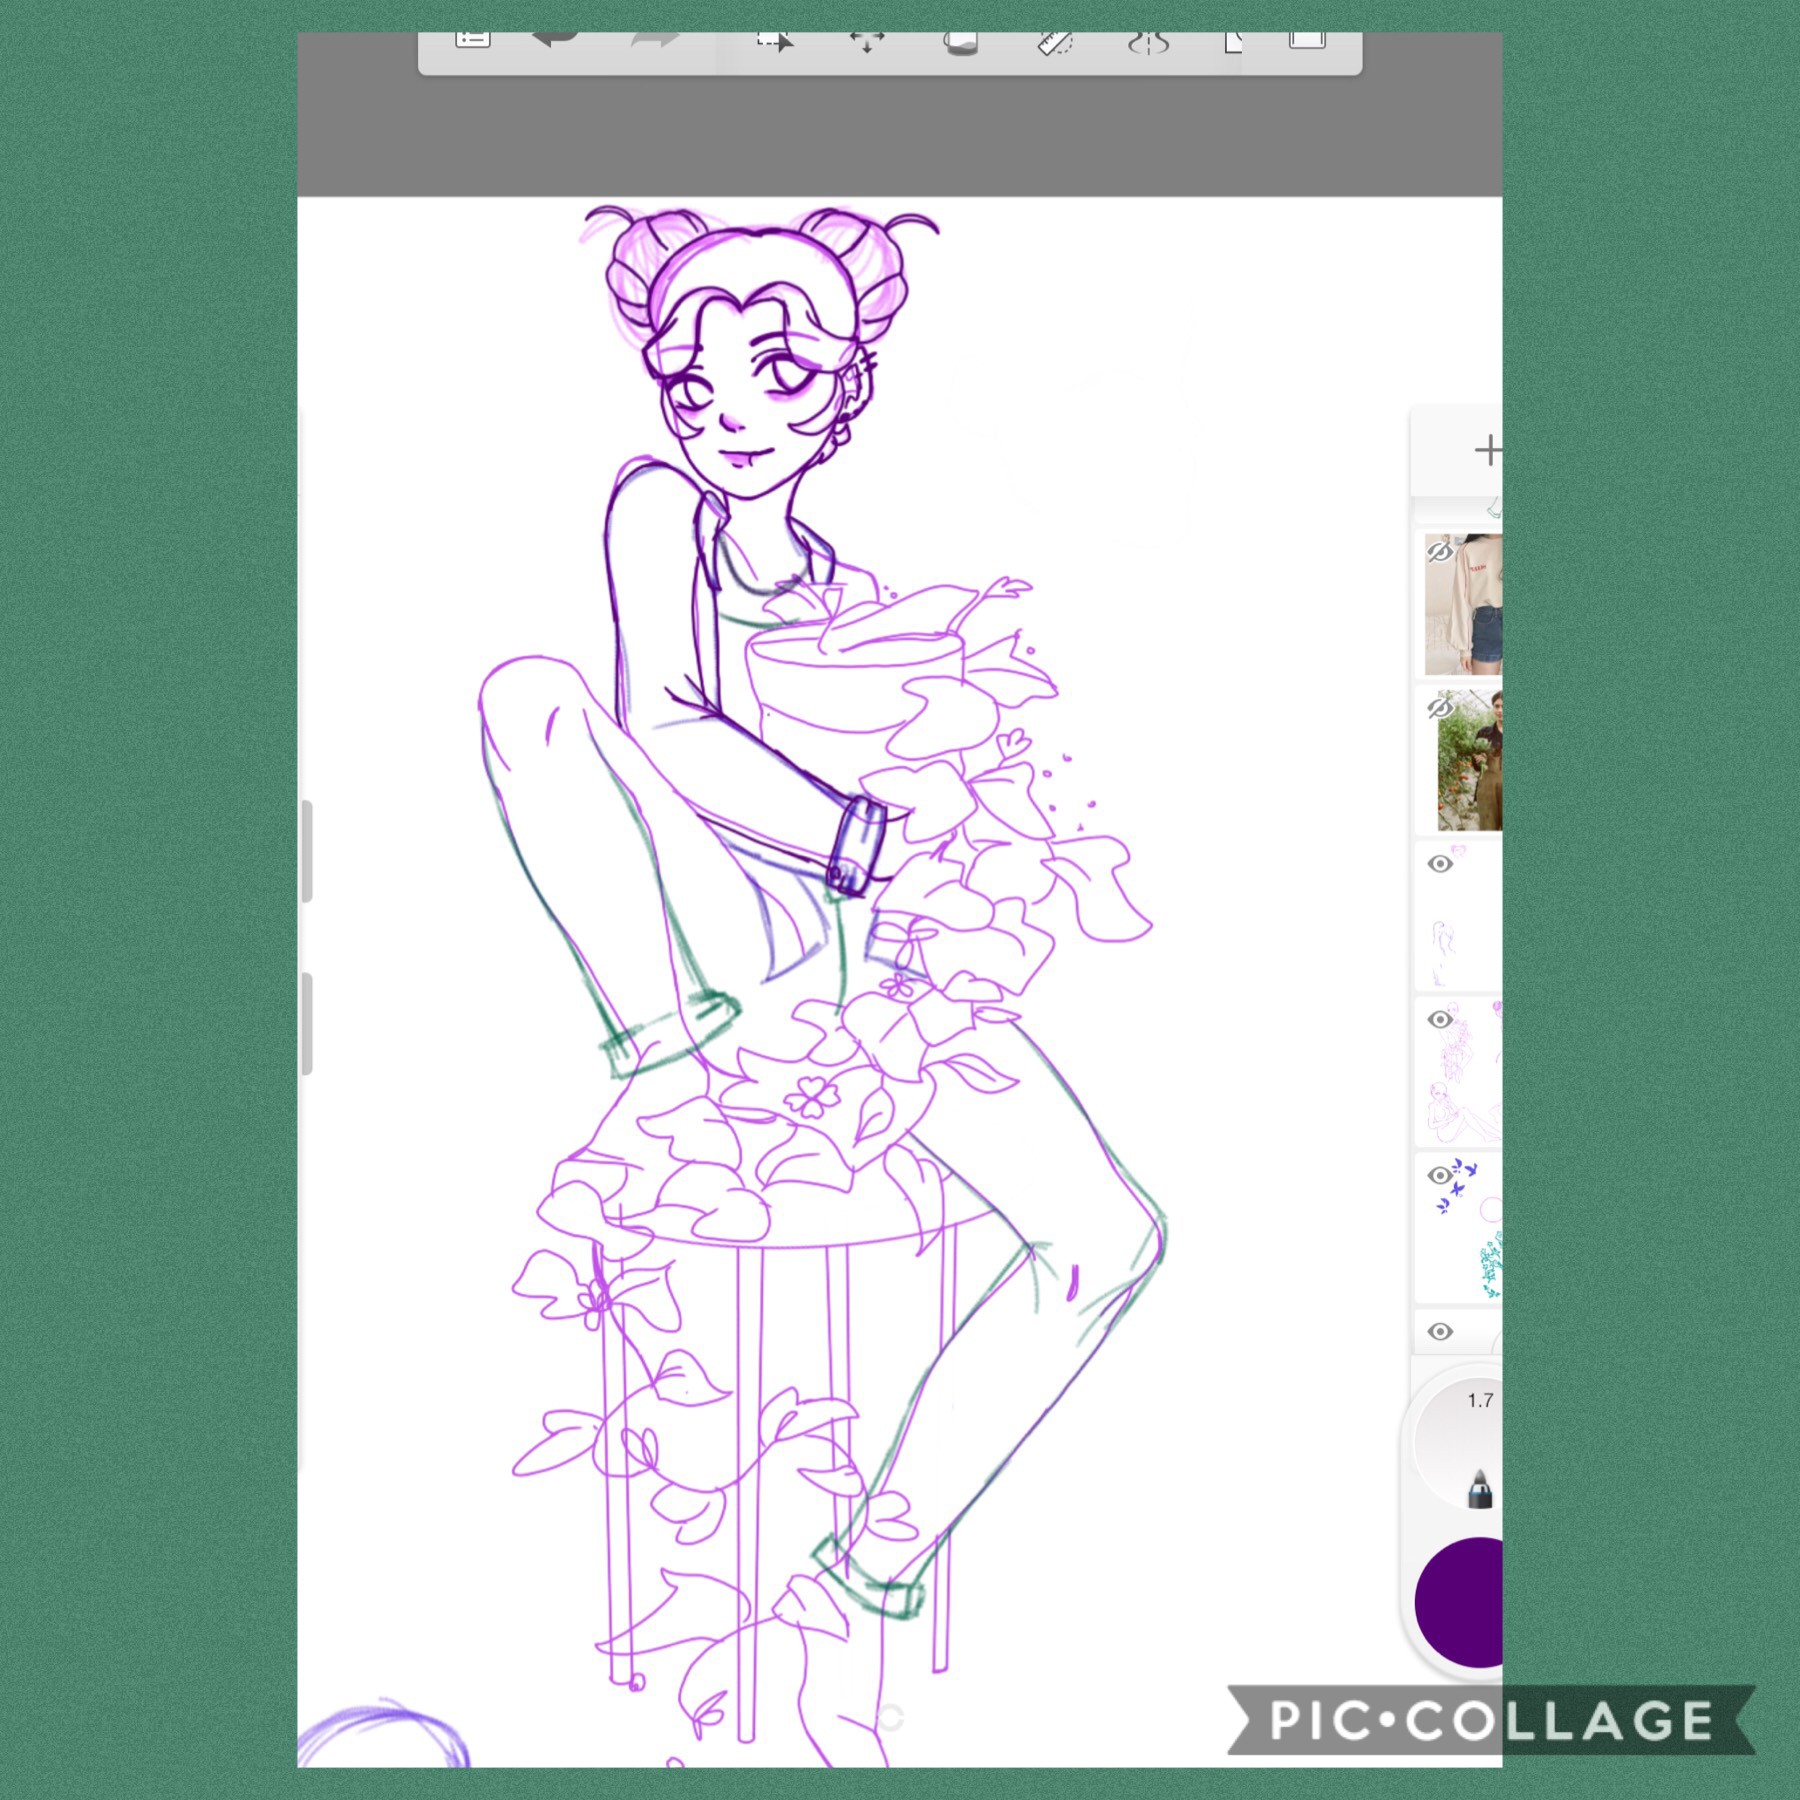 Tap!!))

New Oc on her way!! I don’t have a name yet, so maybe you all could help. So far I have that’s She’s a gardener, and a witch that specializes in earth ‘Magic’ SO lat me know what you think or if you have any name ideas!!